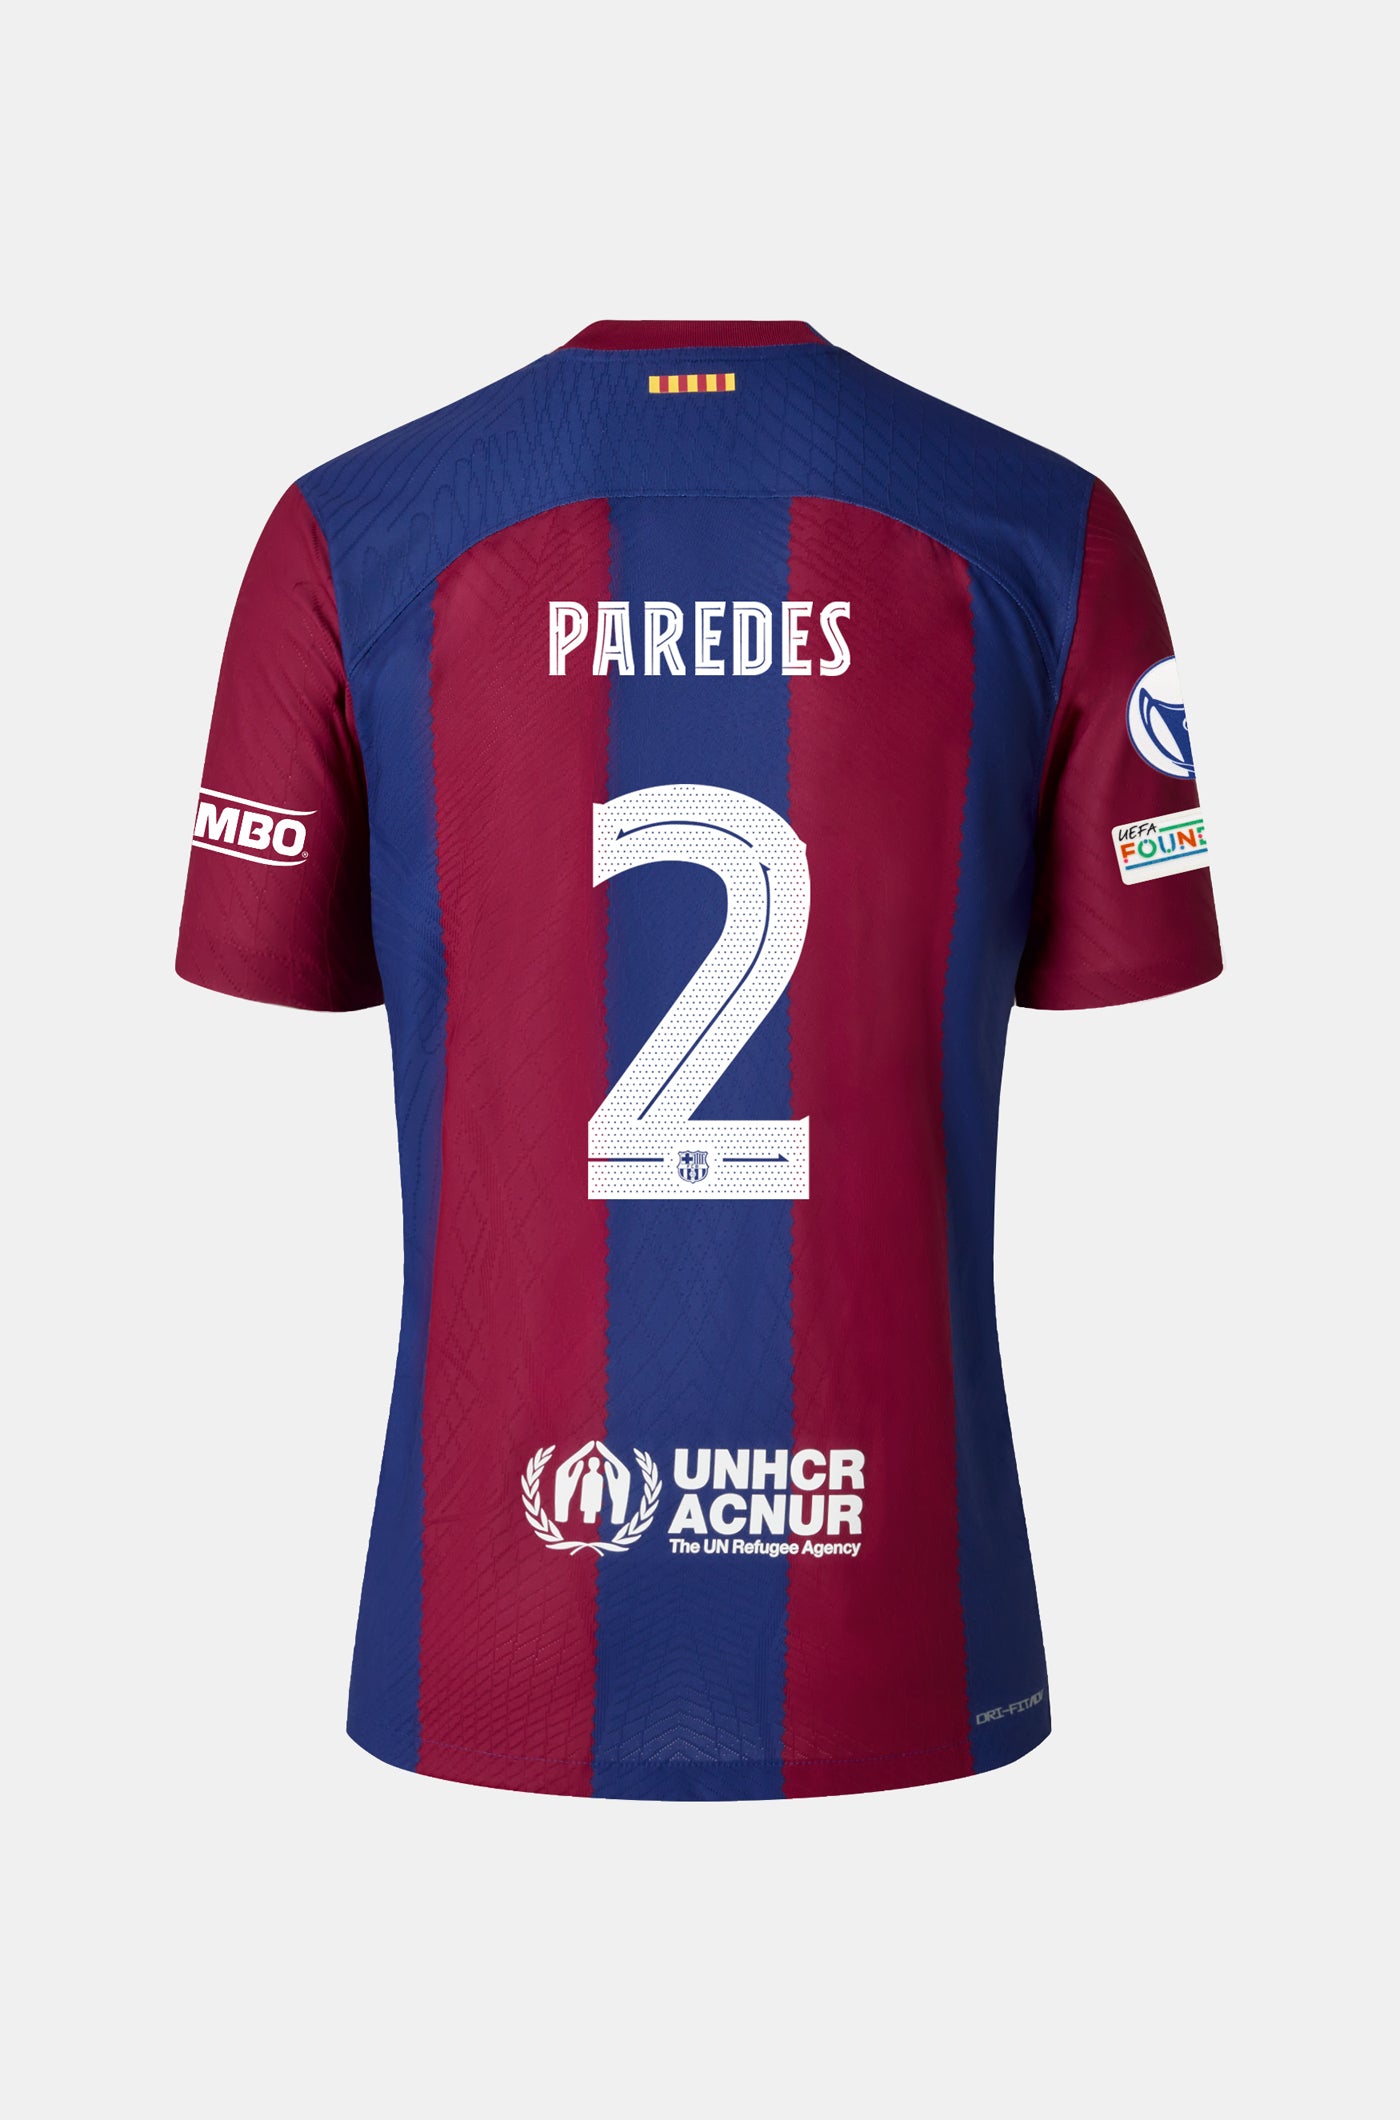 UWCL FC Barcelona home shirt 23/24 Player's Edition  - PAREDES